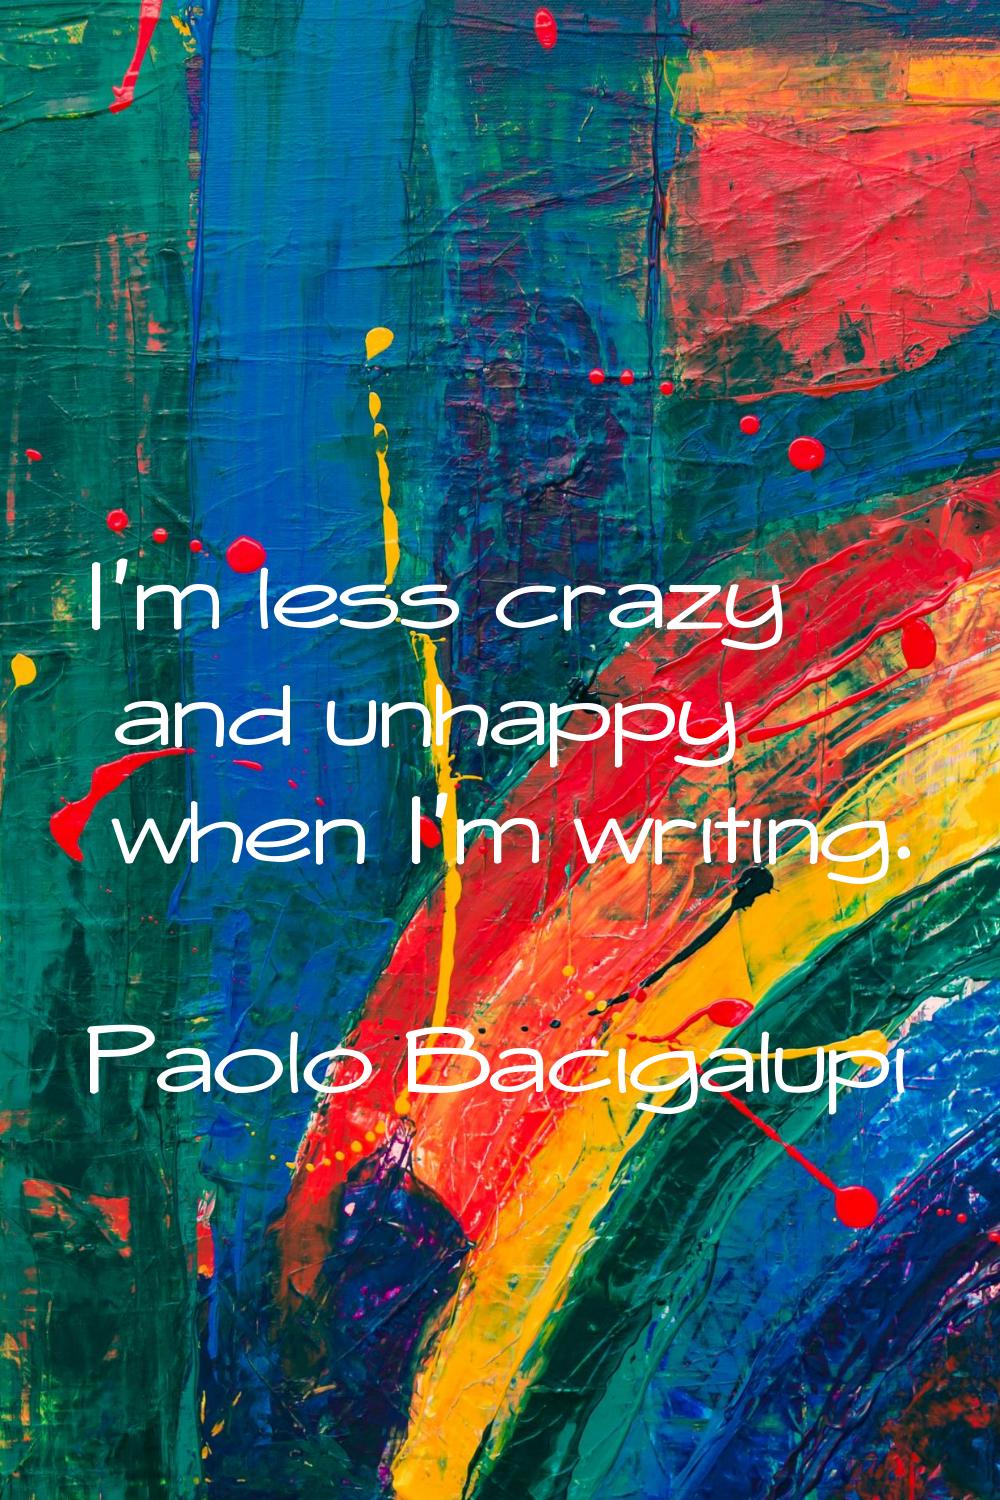 I'm less crazy and unhappy when I'm writing.